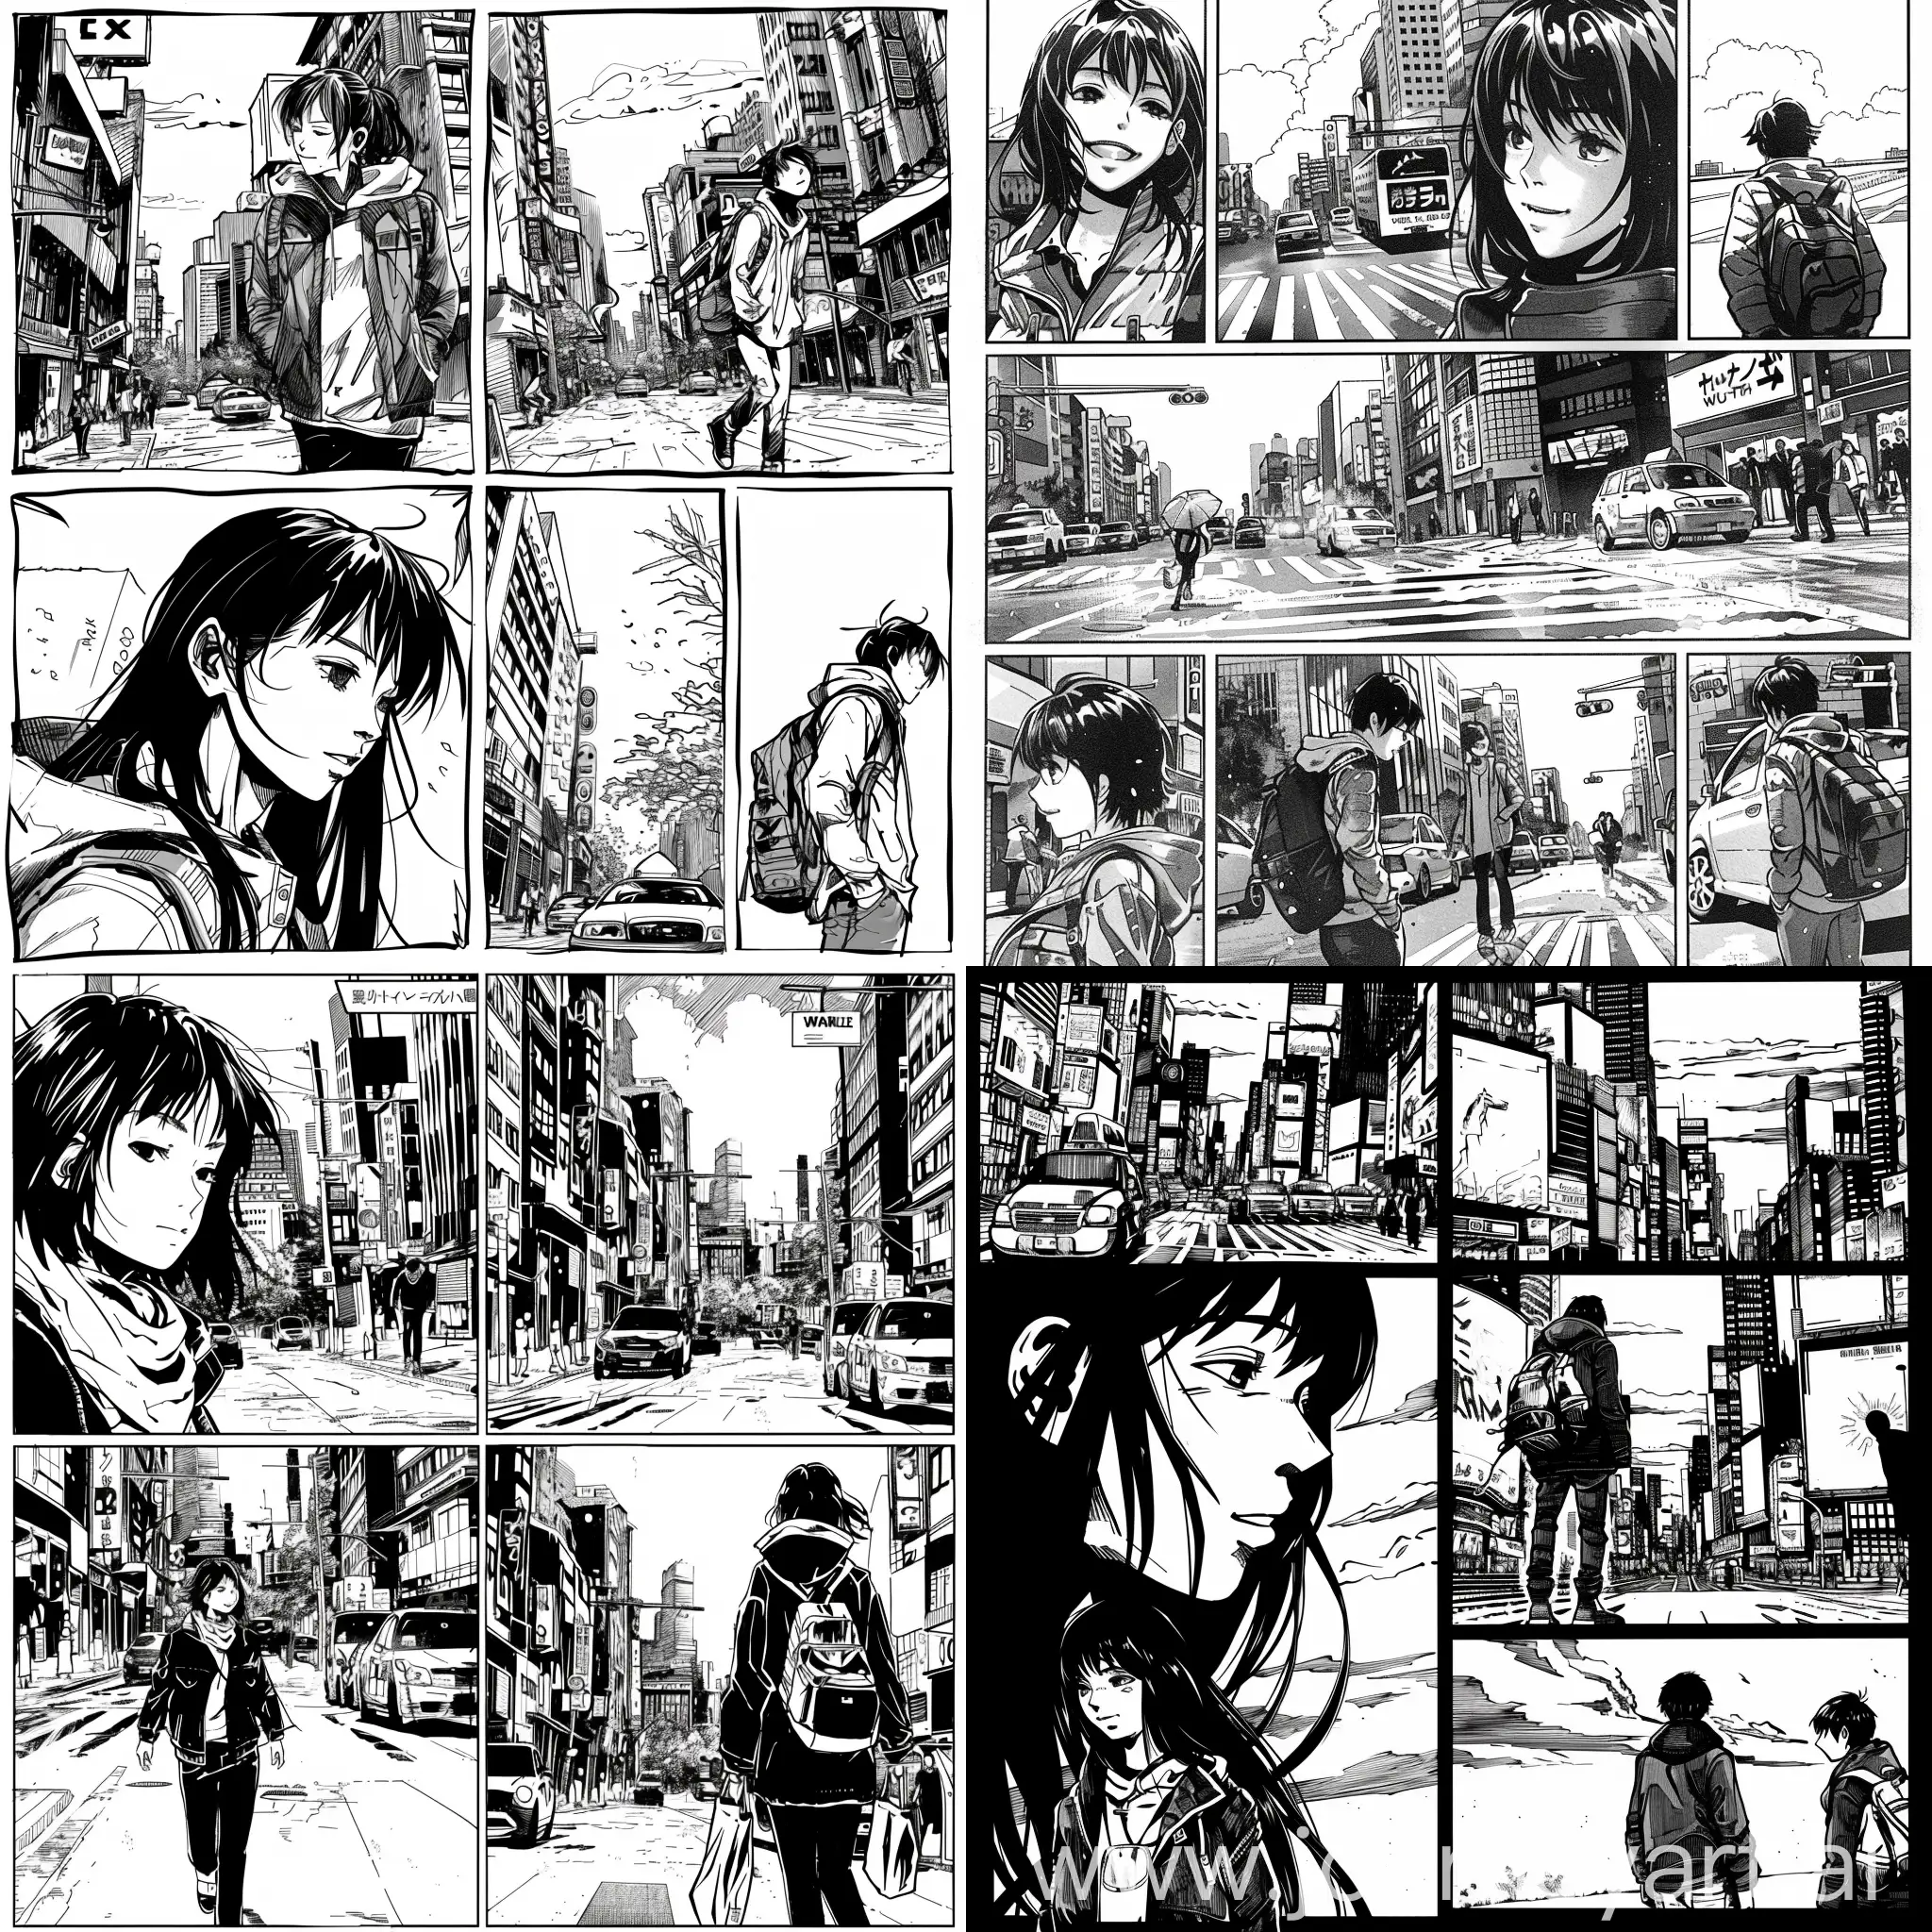 comic book page with panels in the style of anime, black and white manga. Each panel depicts a girl and a guy walking along NYC